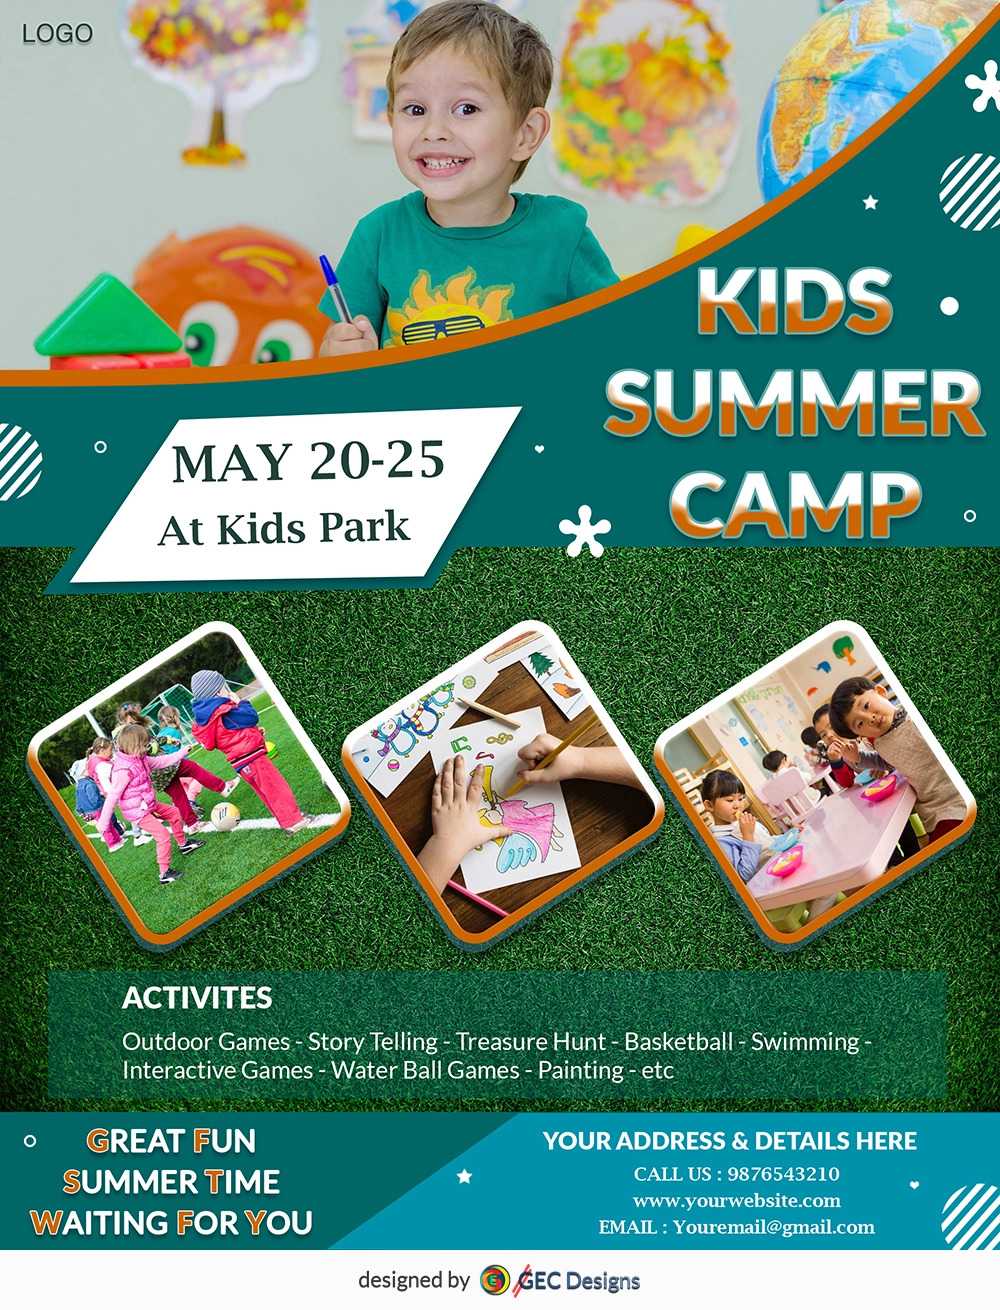 Download Free Great Fun Kids Summer Camp Flyer Design Templates Throughout Summer Camp Brochure Template Free Download